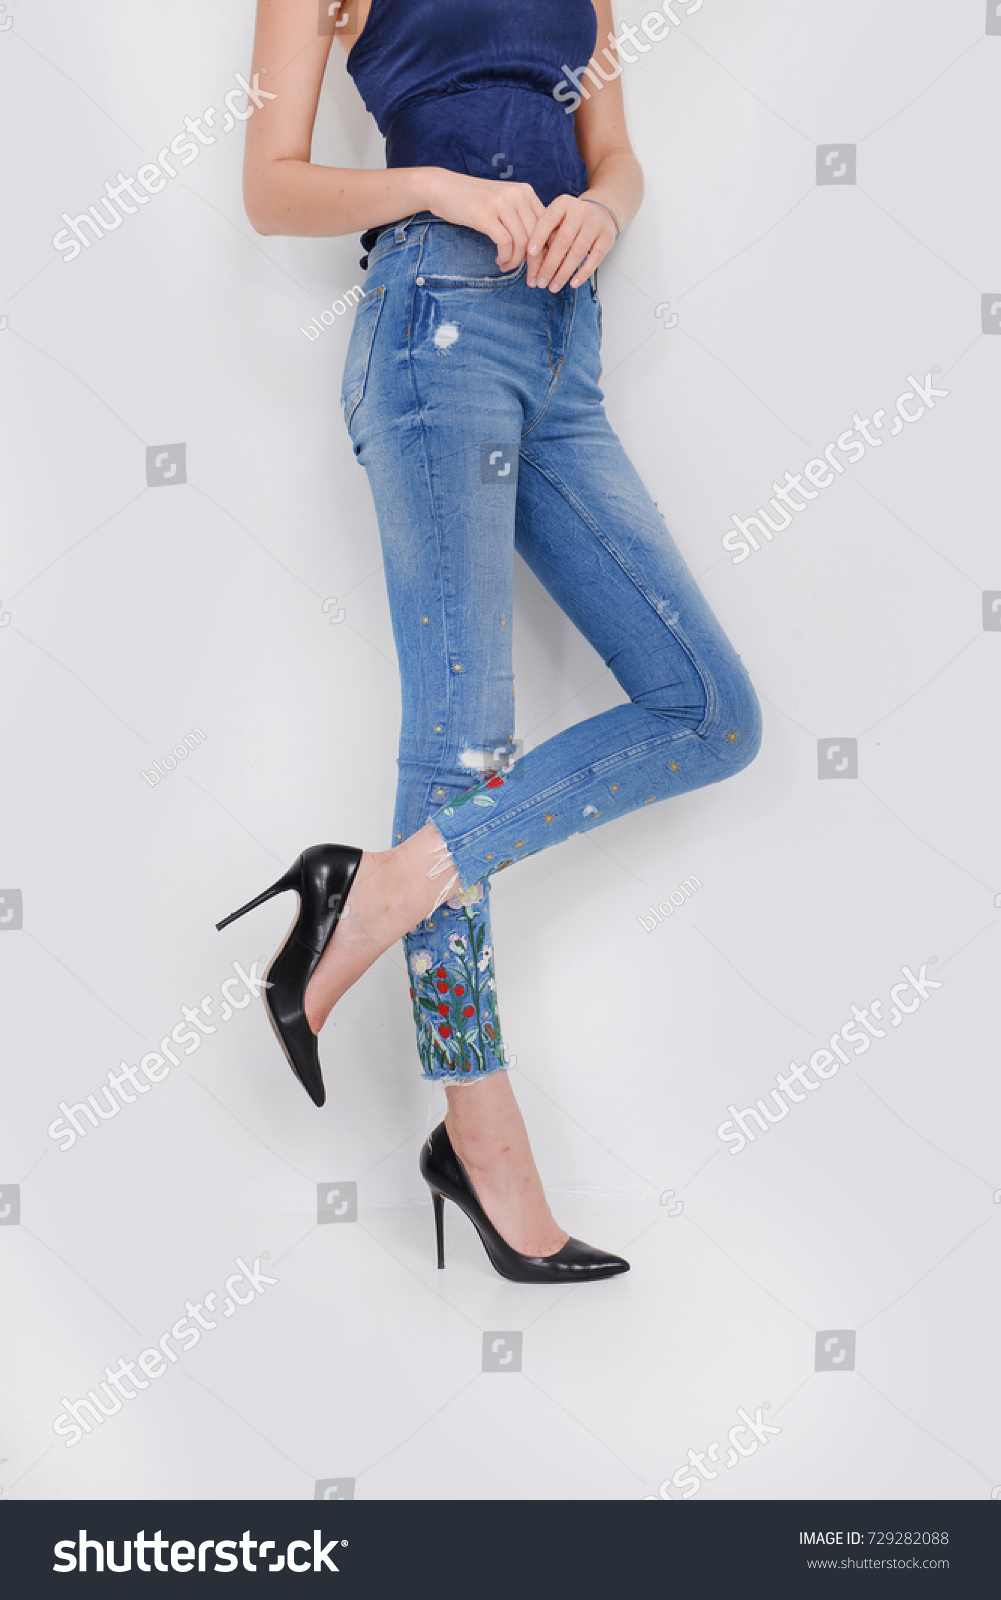 jeans with flowers on the side